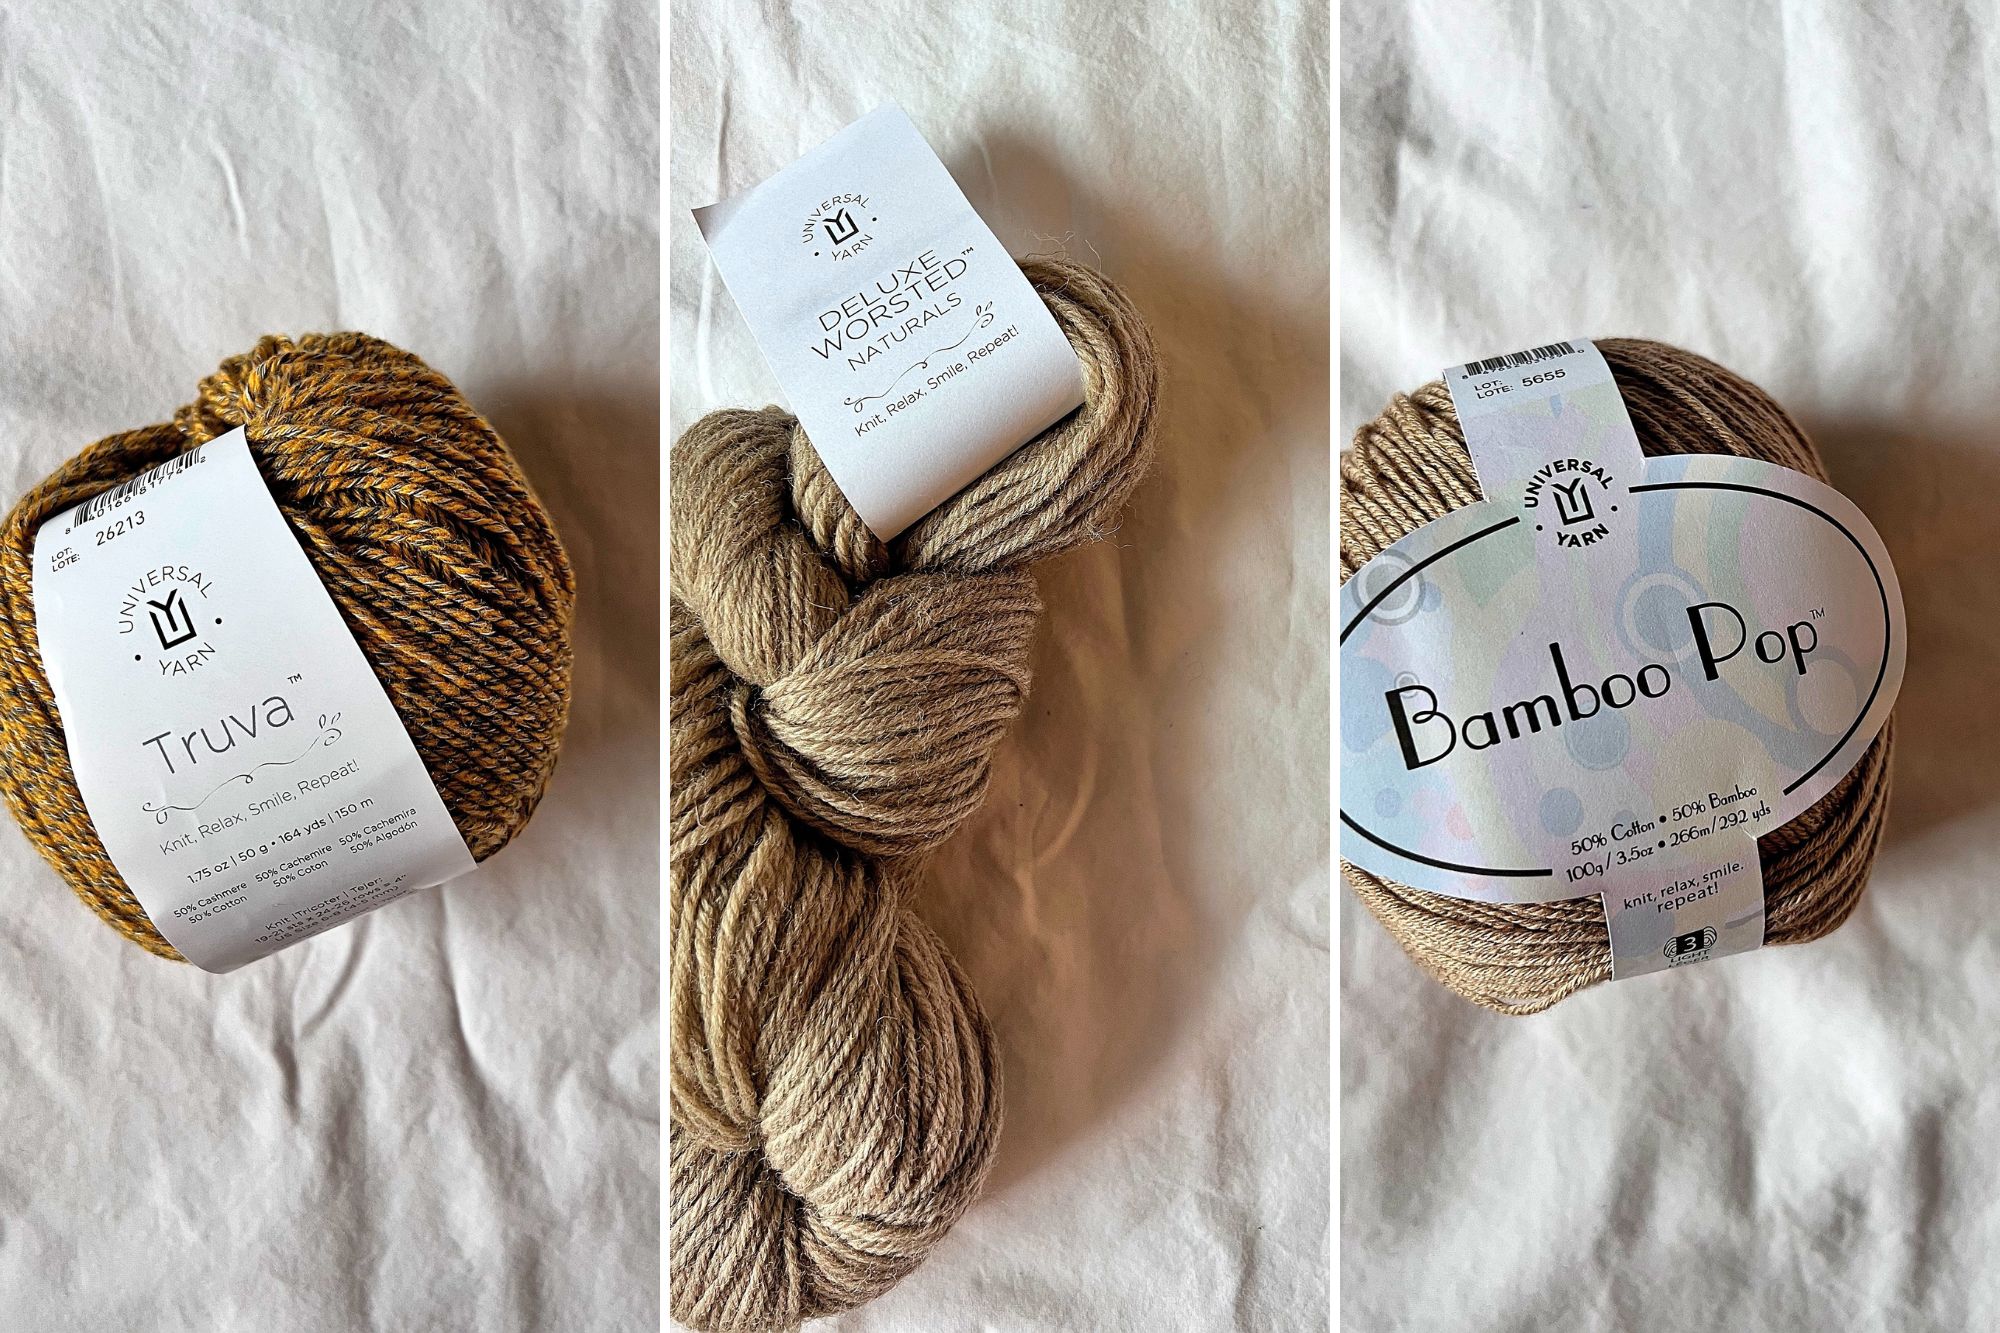 Three skeins of Universal Yarn: Truva, Deluxe Worsted, and Bamboo Pop